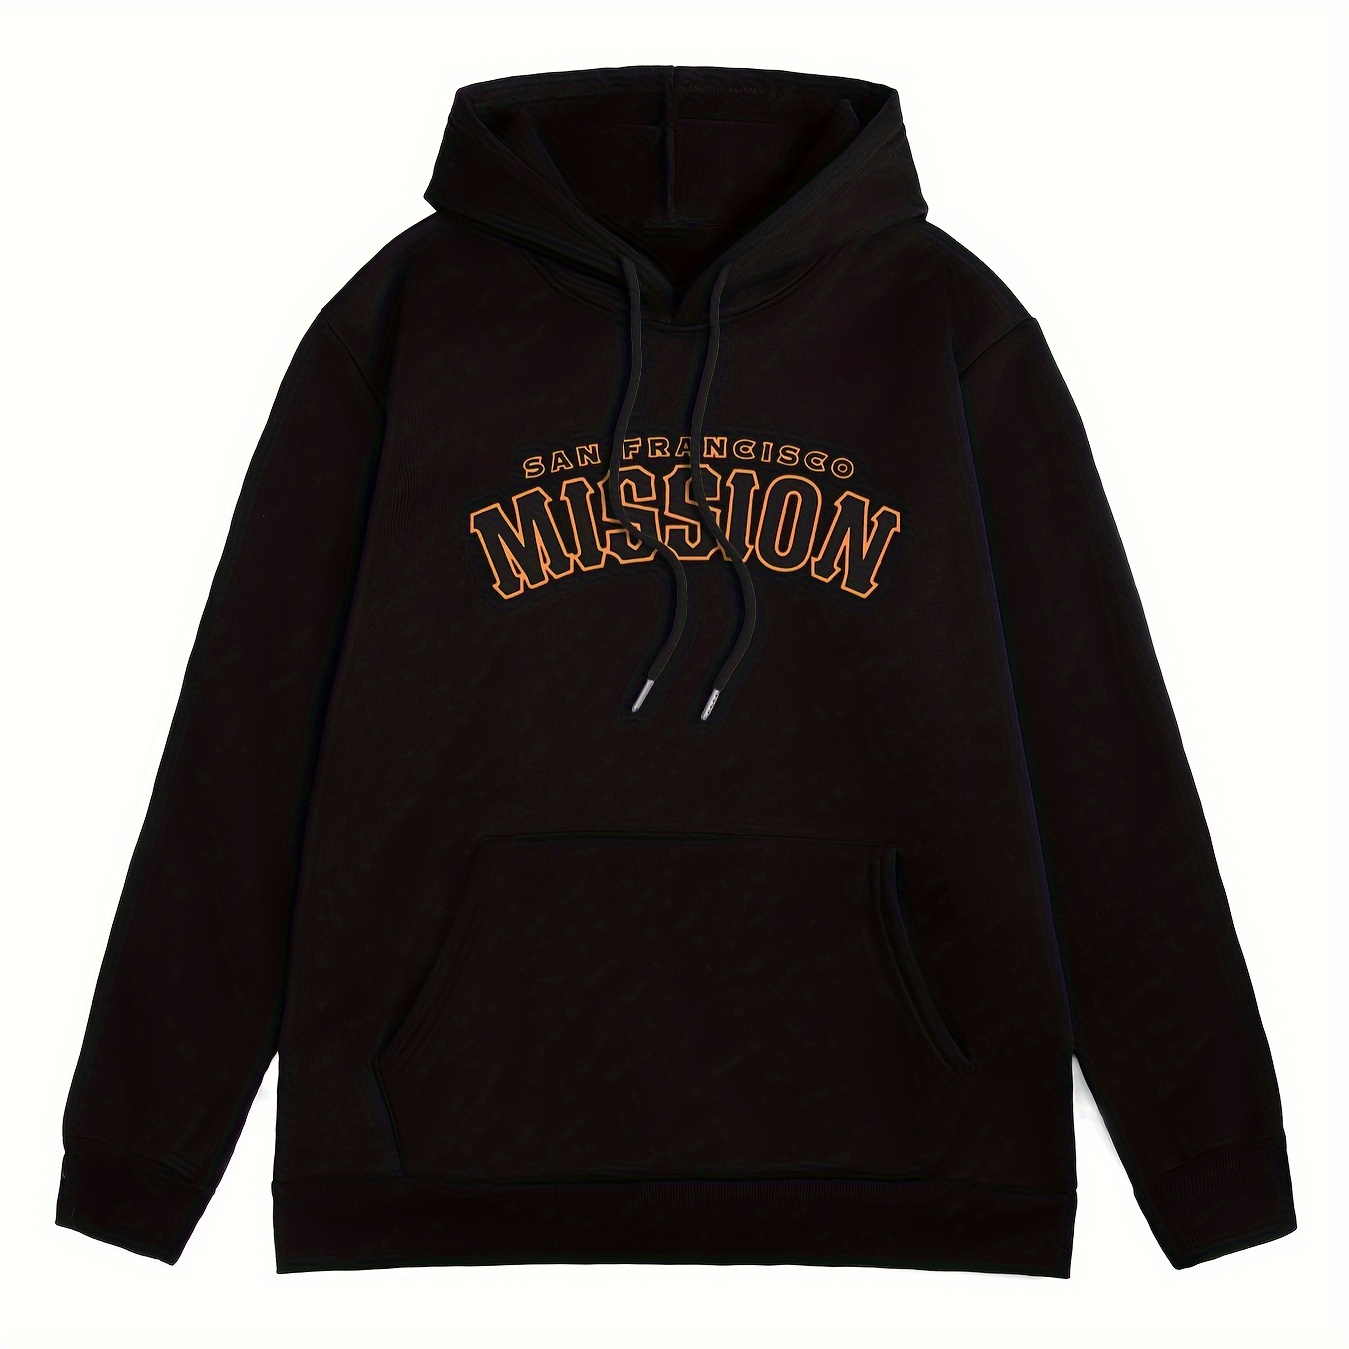 

San Francisco Mission Print Hoodie, Cool Sweatshirt For Men, Men's Casual Hooded Pullover Streetwear Clothing For Spring Fall Winter, As Gifts